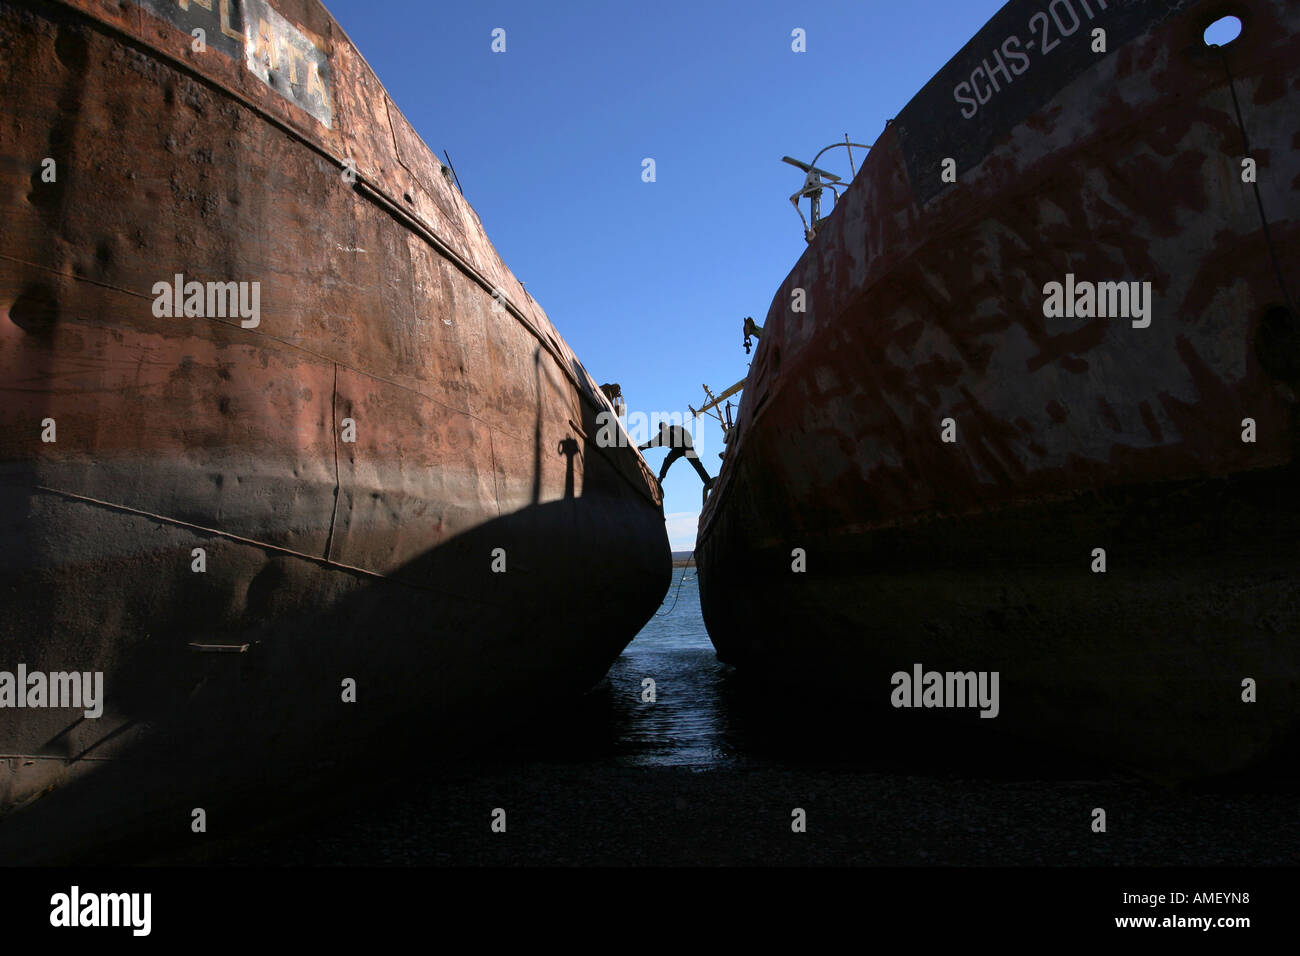 A man going from one ship to another in Mar del Plata, Argentina. The fishing boat hull looks old, oxidize and rusty, corroded b Stock Photo